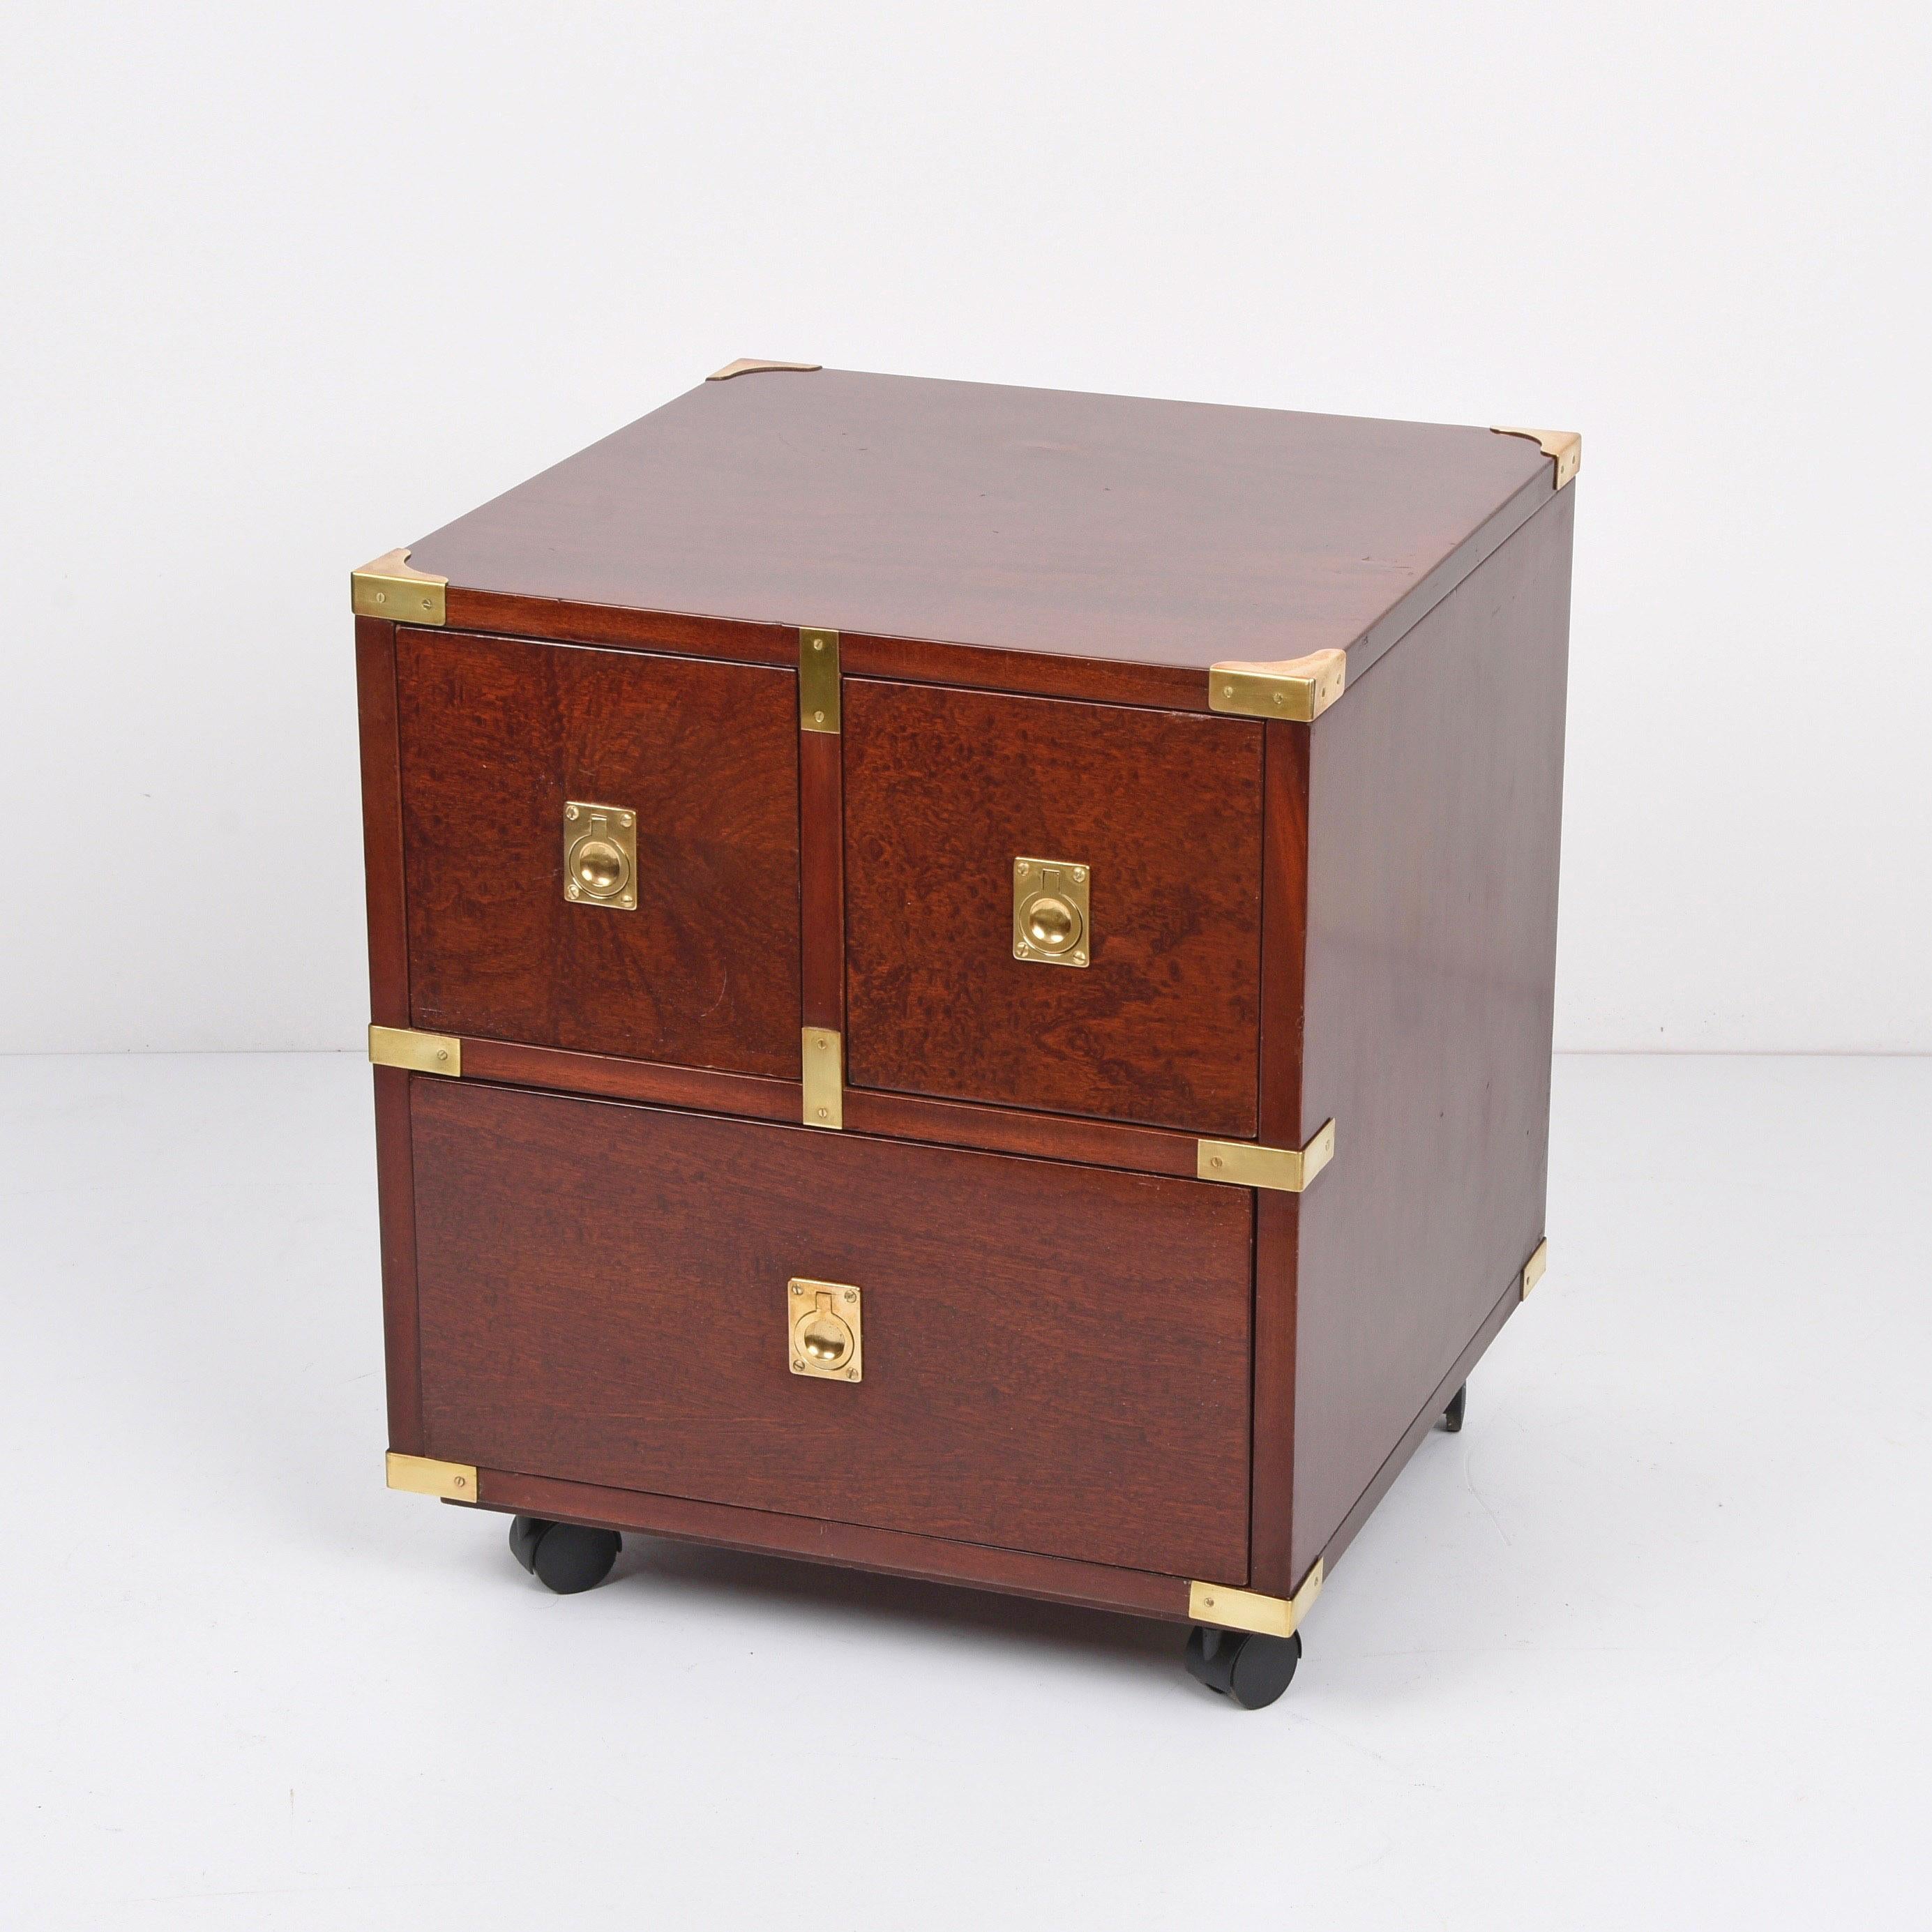 Wonderful nightstand midcentury country style three-drawer chest of drawers. This fantastic item is made of wood with brass hardware on casters.

A marvellous piece that has wonderful lines as it is almost cubical with the top two squared drawers